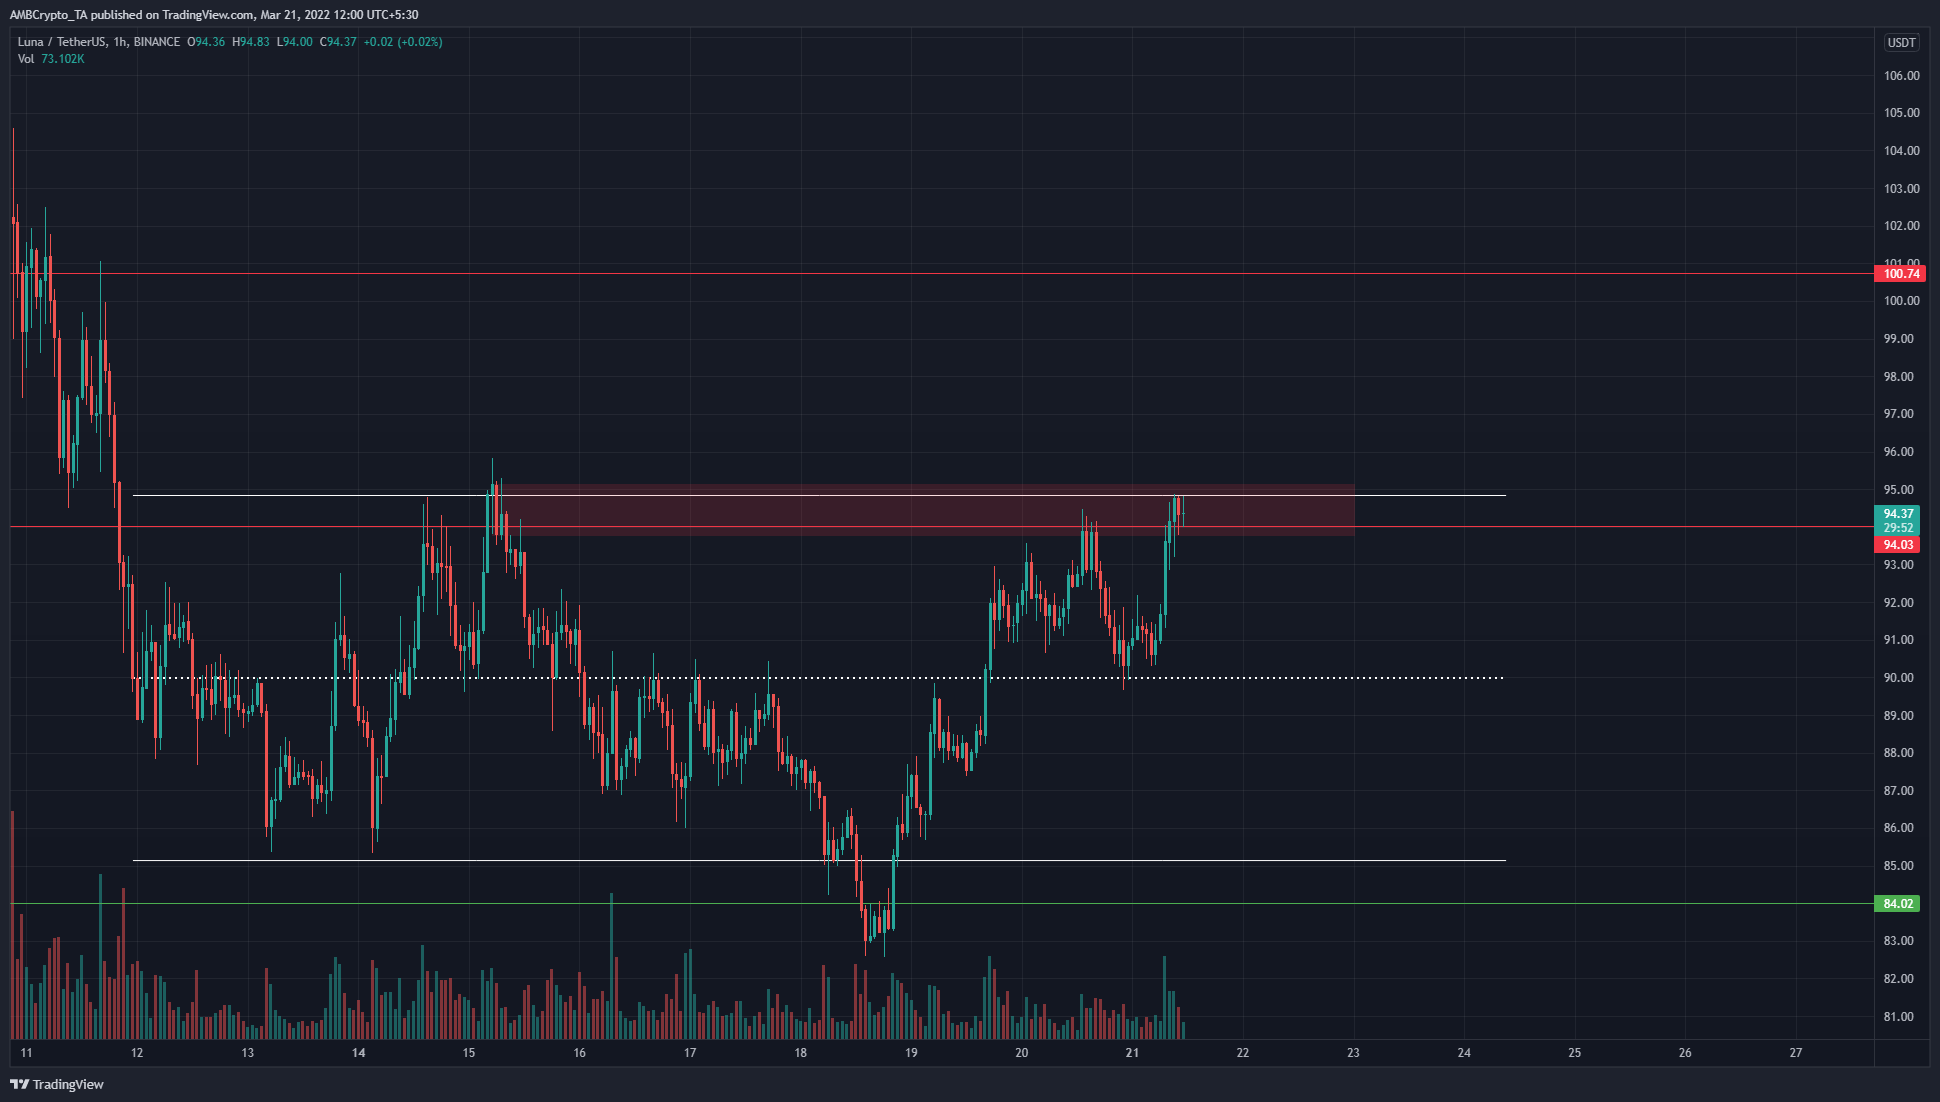 LUNA at a short-term supply zone, could it be headed back to the range lows?